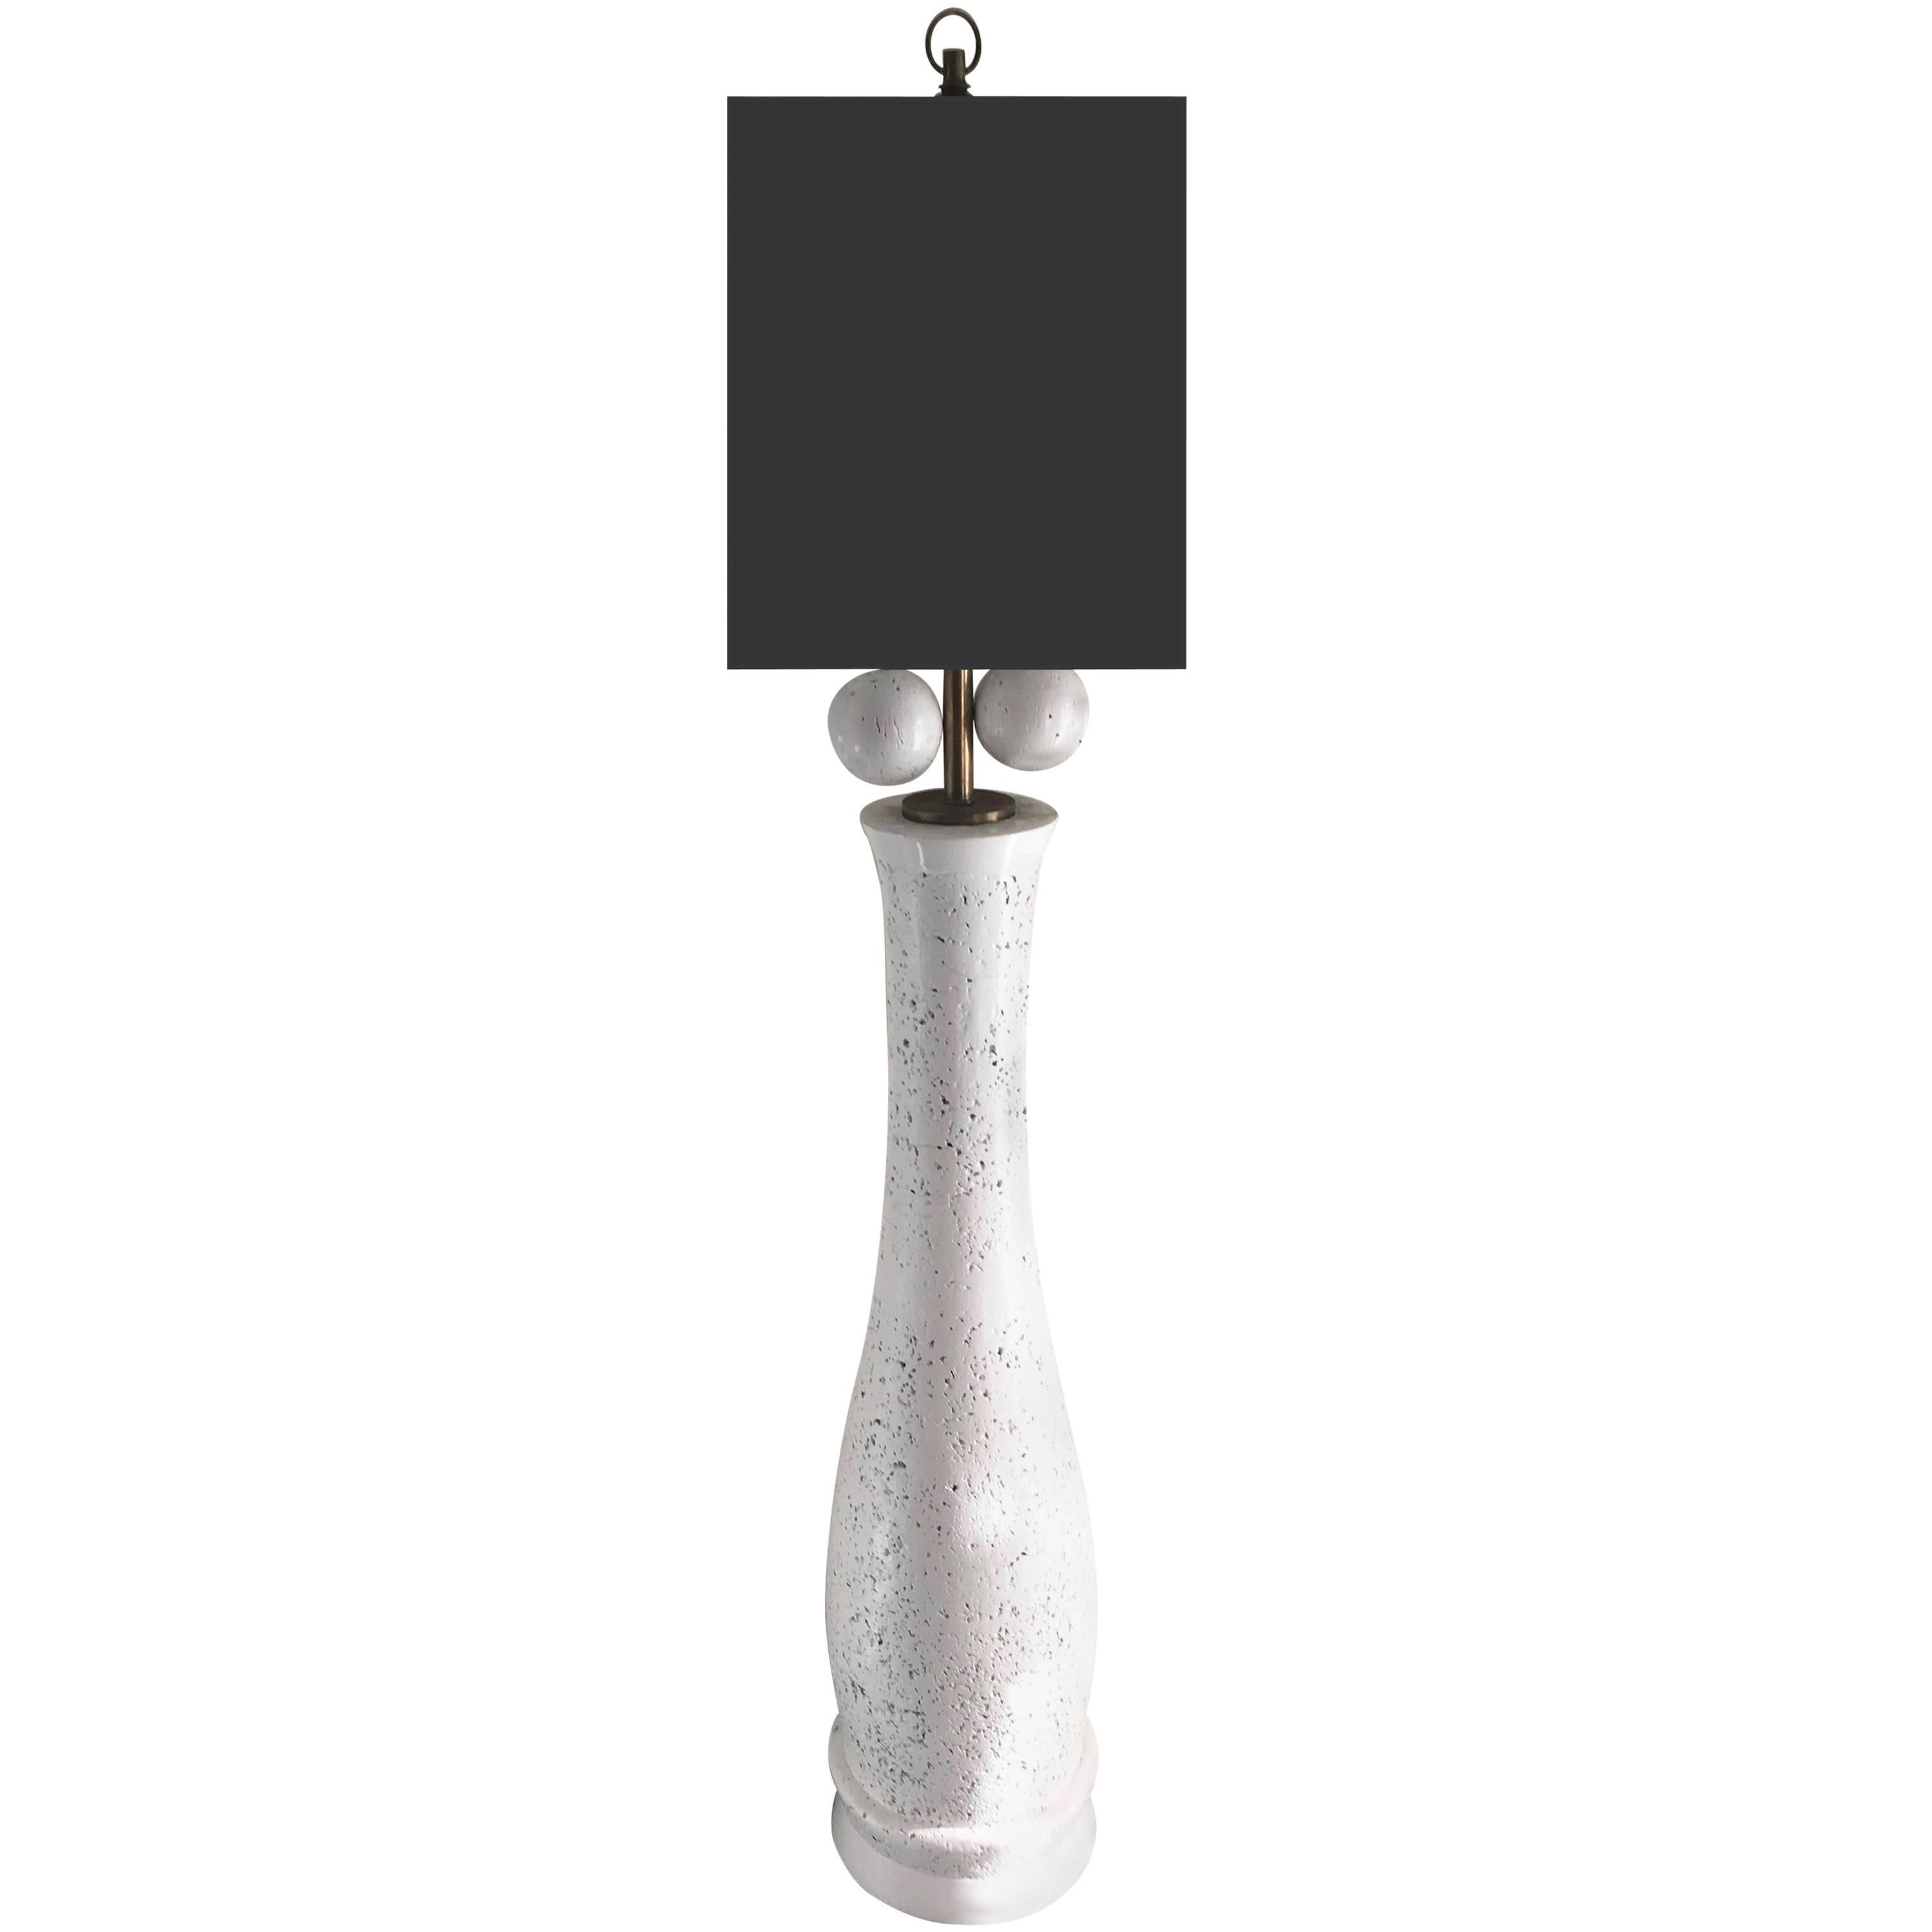 Monumental White Lacquered Cork Floor Lamp in the Manner of Milo Baughman